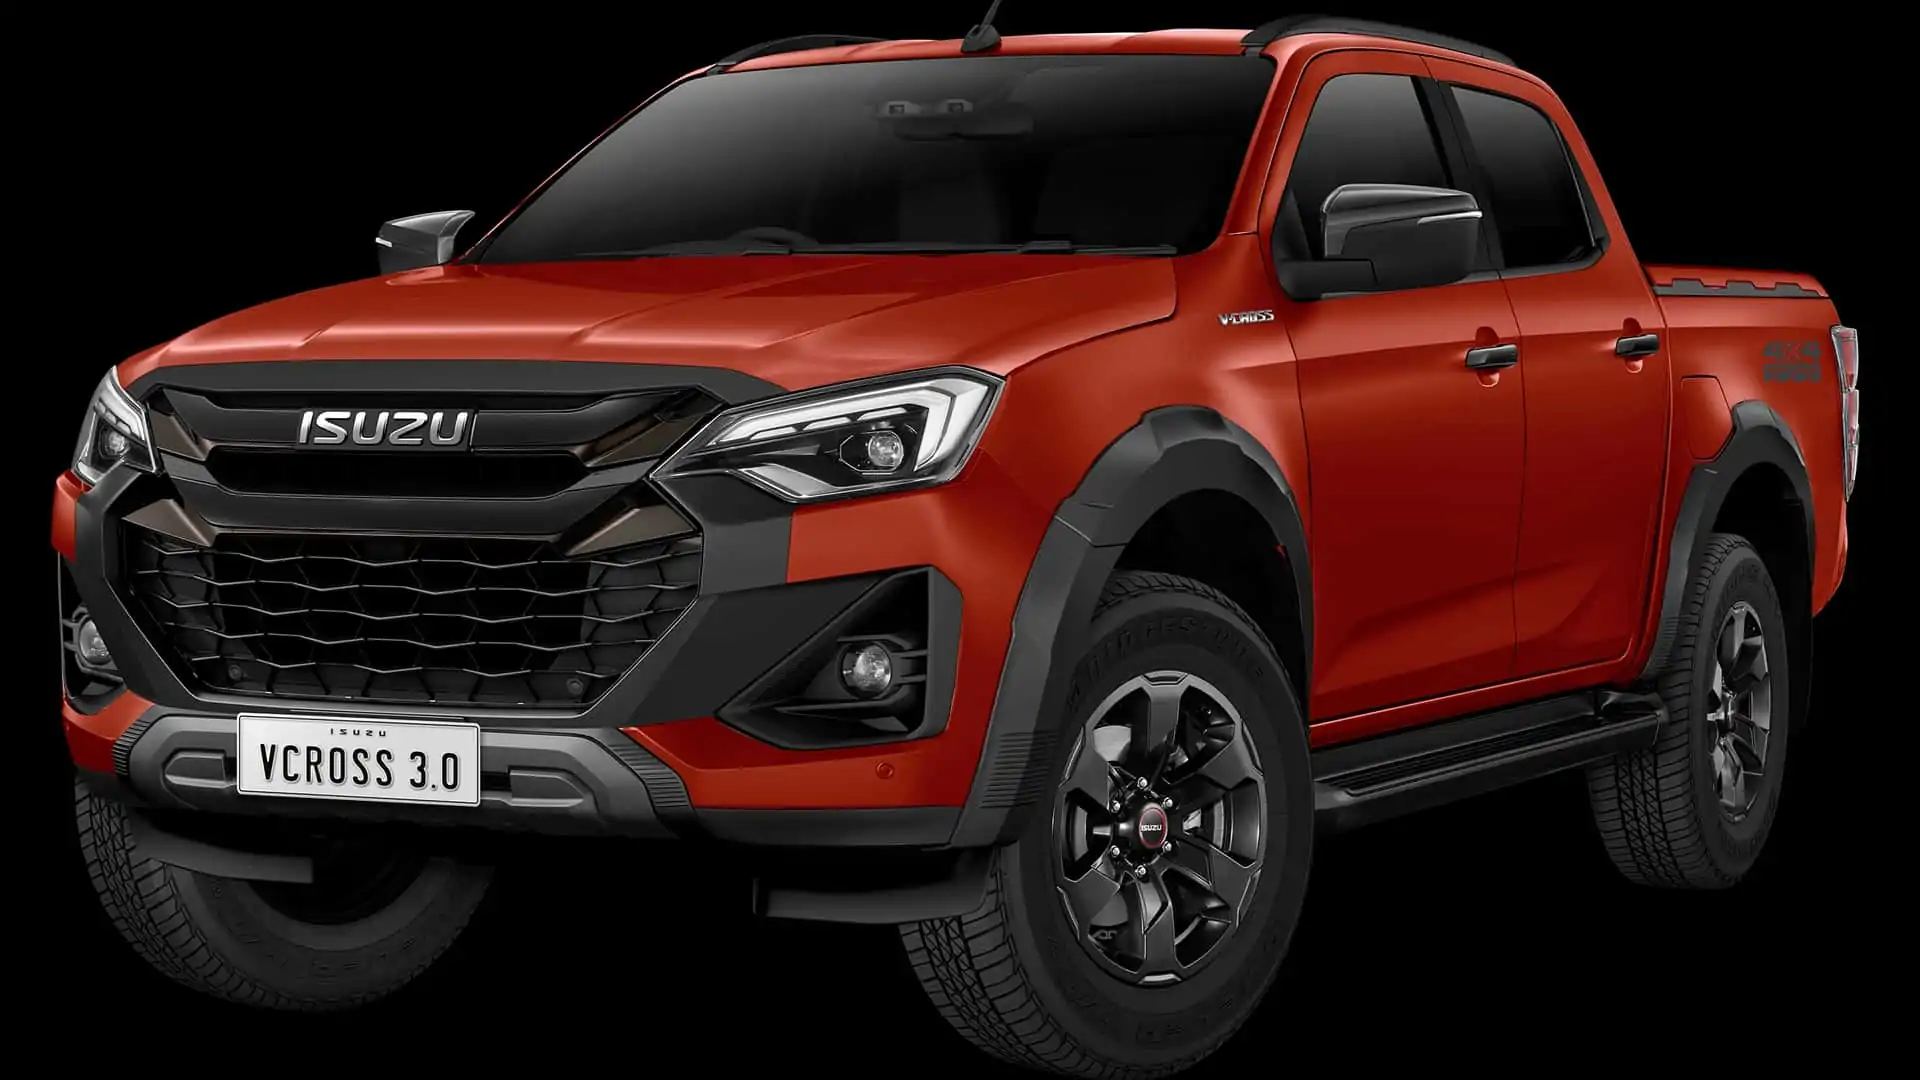 What off-road accessory company could Isuzu potentially partner with for branded approved accessories in Australia?